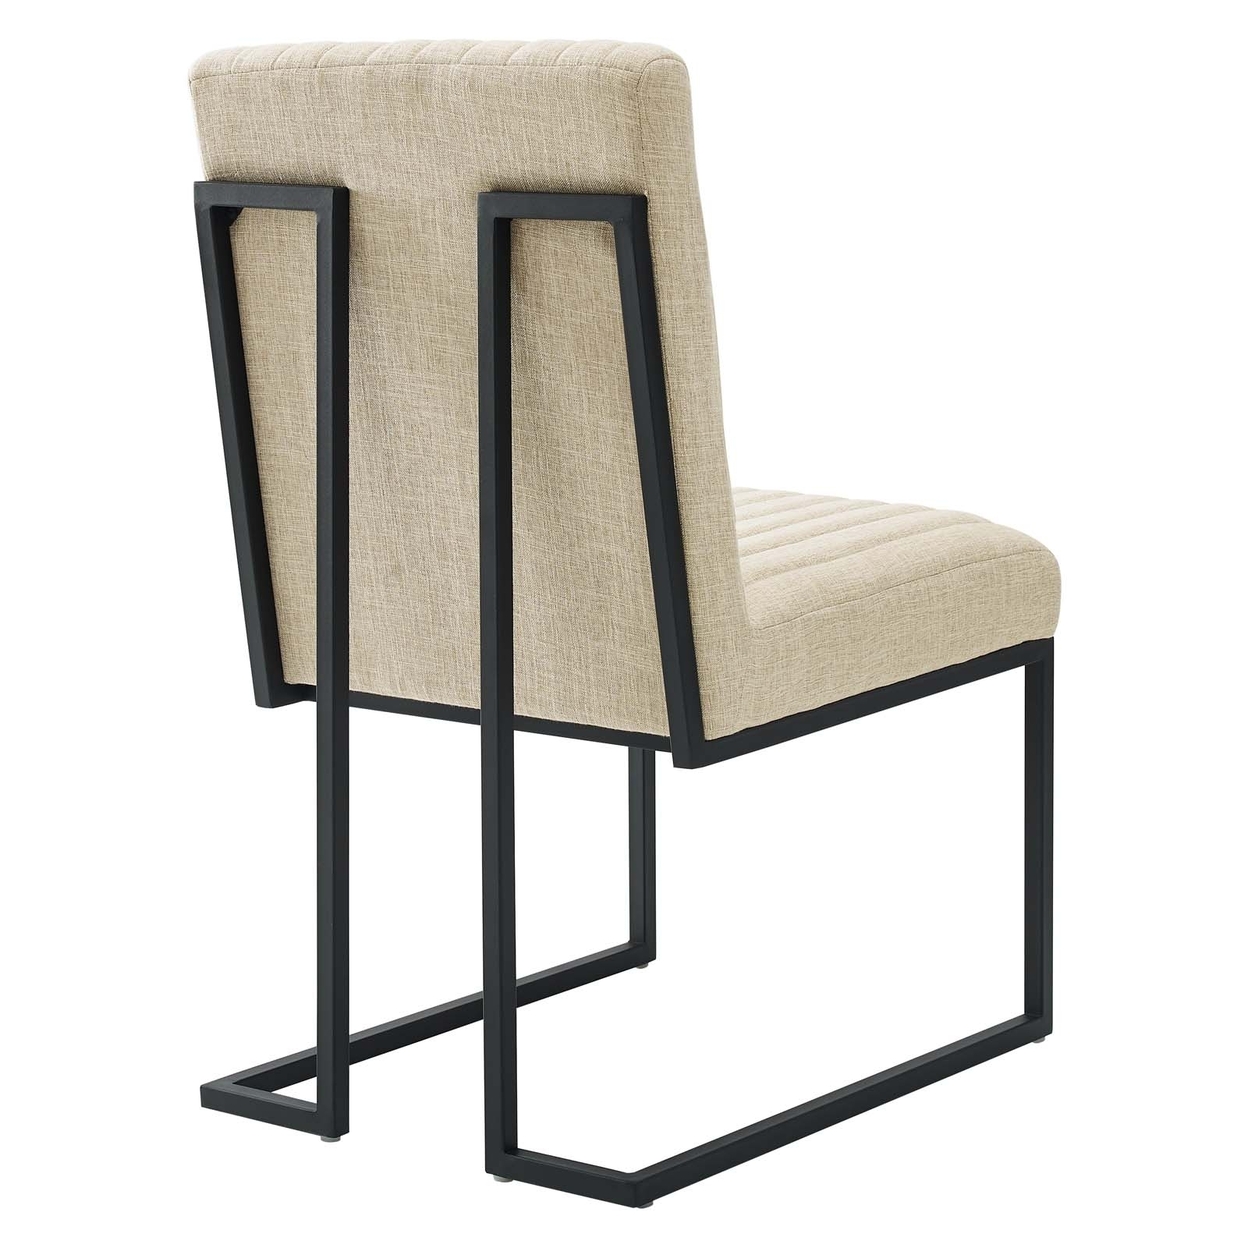 Indulge Channel Tufted Fabric Dining Chair, Beige